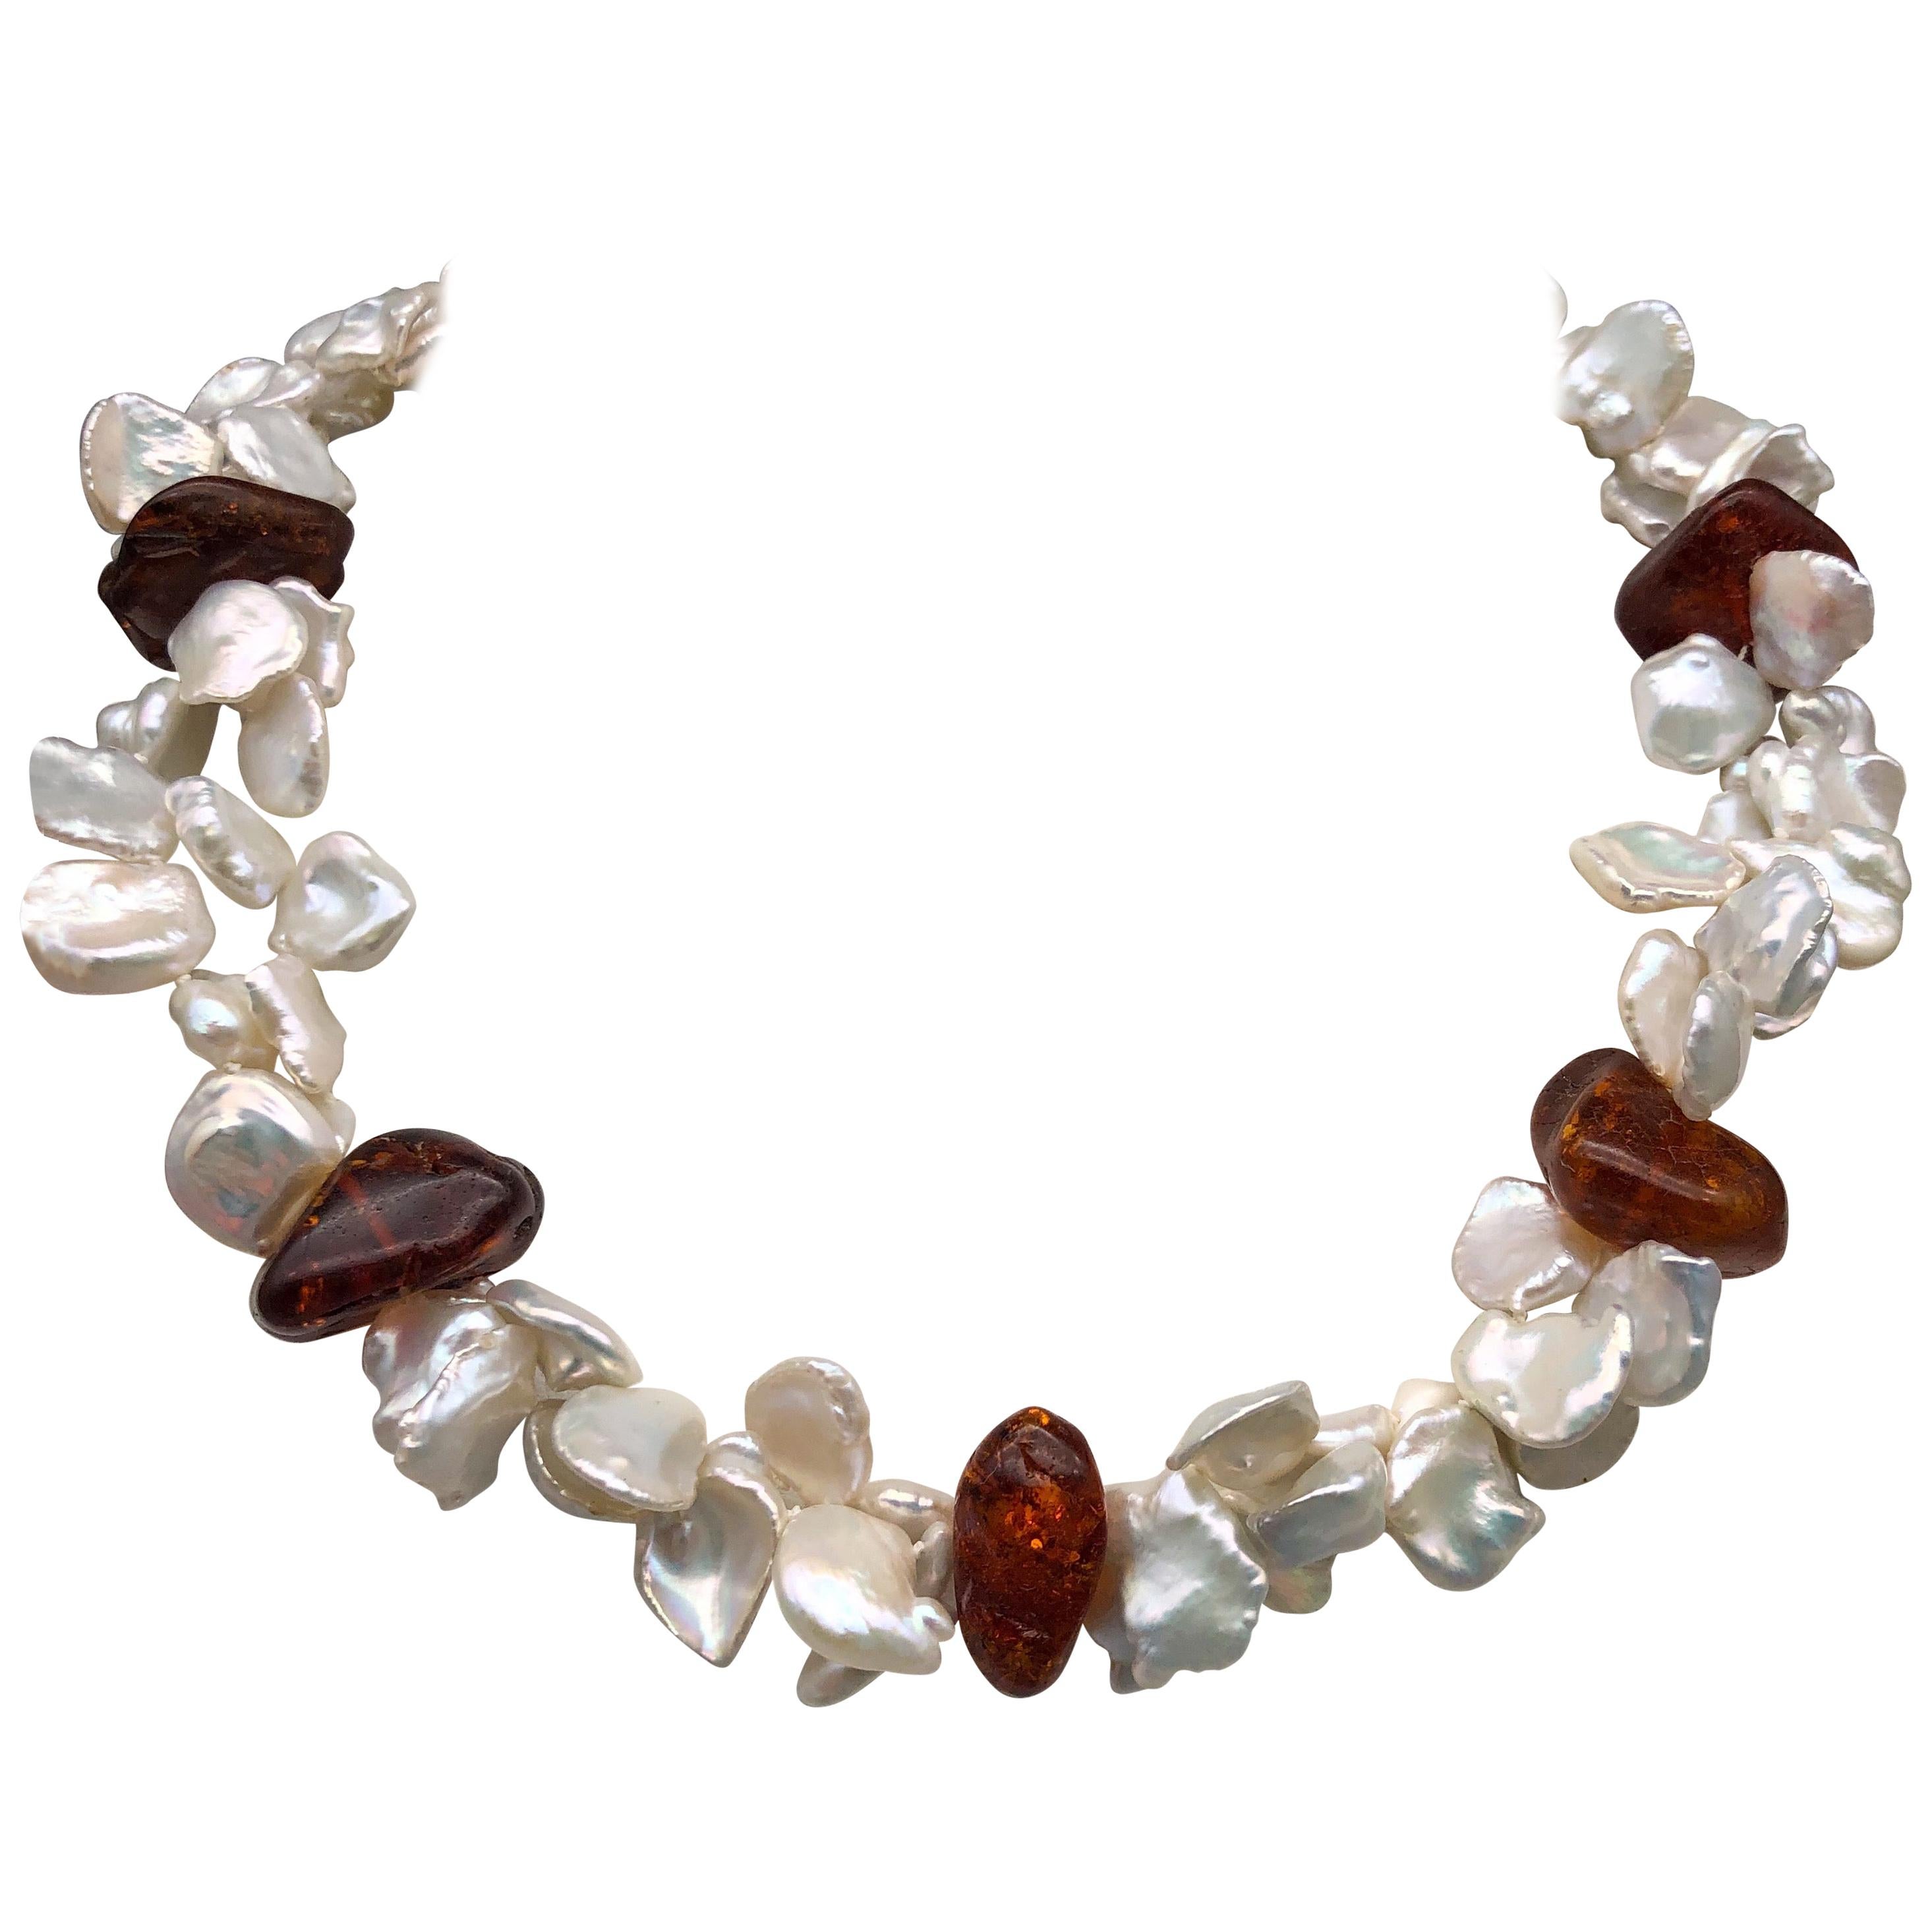  Unique One-of-a-Kind Keshi Pearl and Baltic Amber Necklace - a piece of jewelry that is sure to turn heads and capture attention wherever you go. This stunning necklace features a double strand of beautiful Keshi Pearls, perfectly matched and